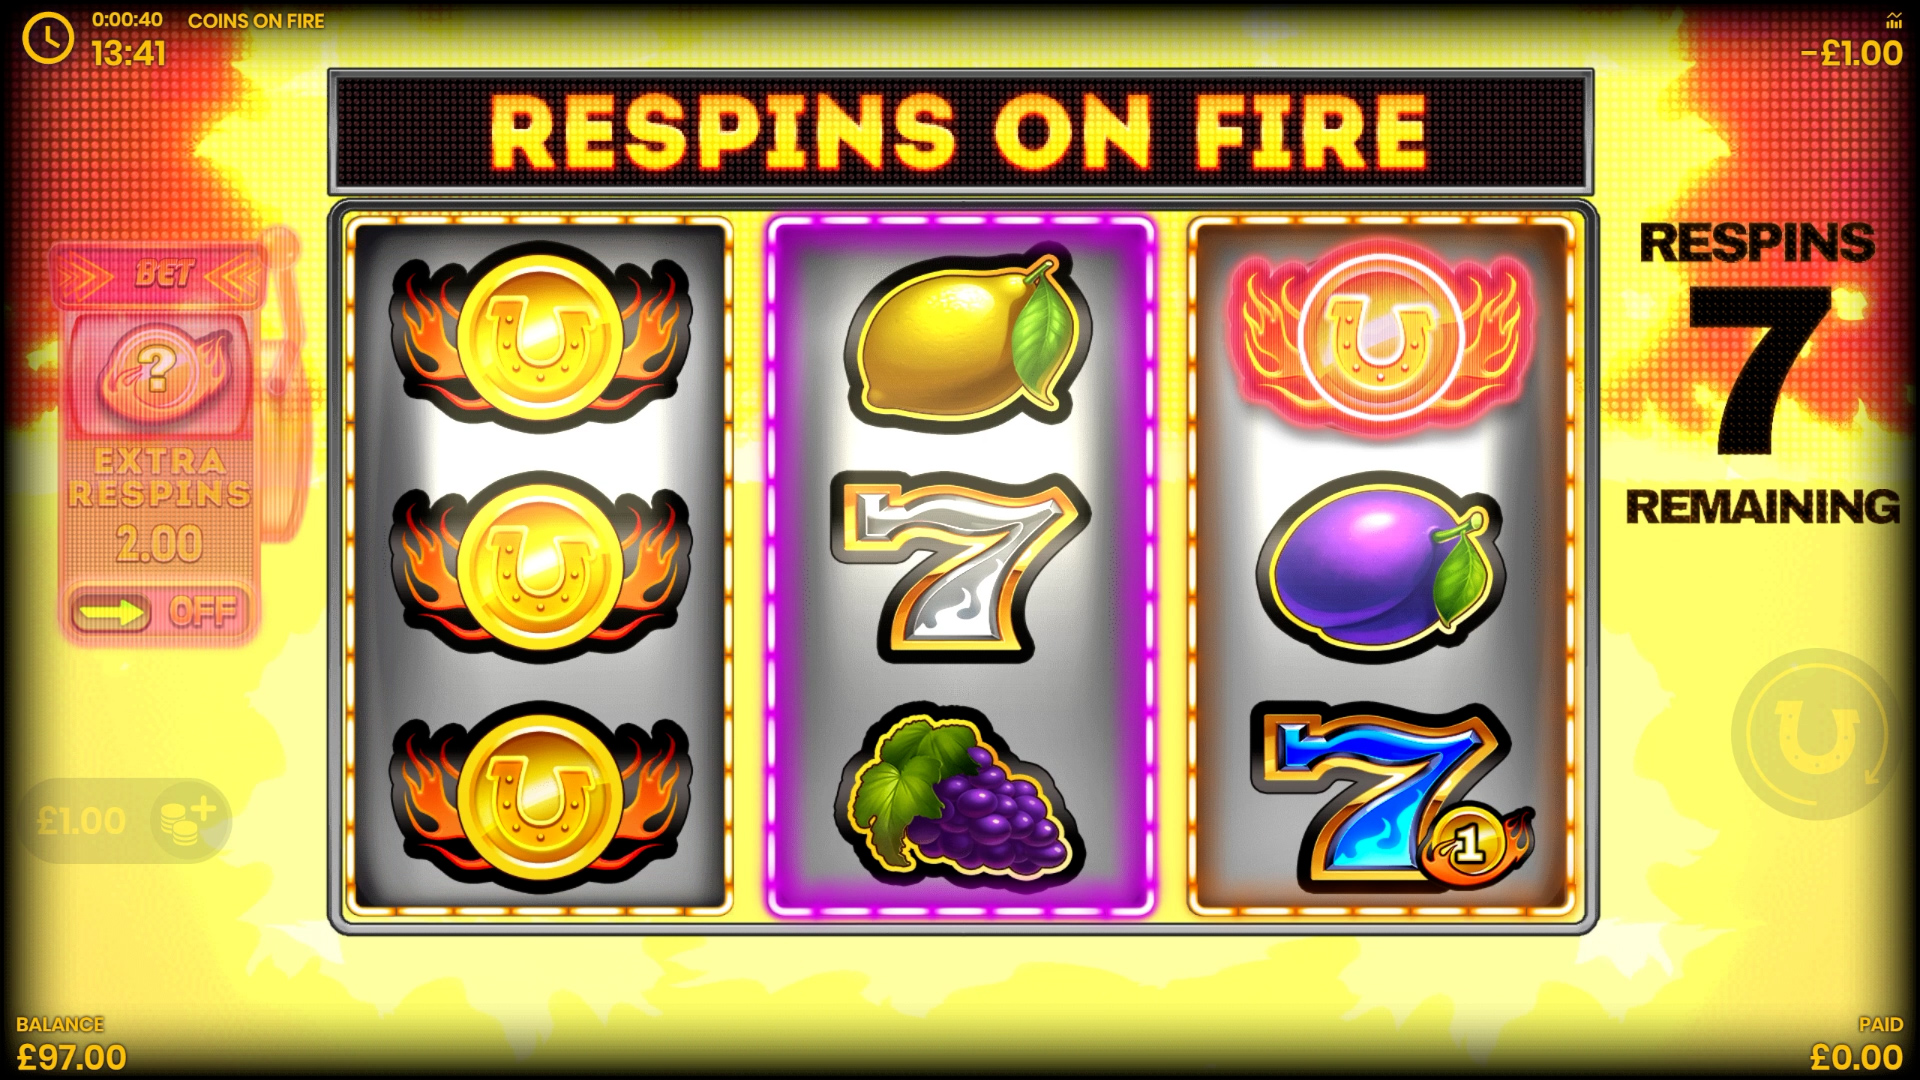 Coins on fire slot respins on fire